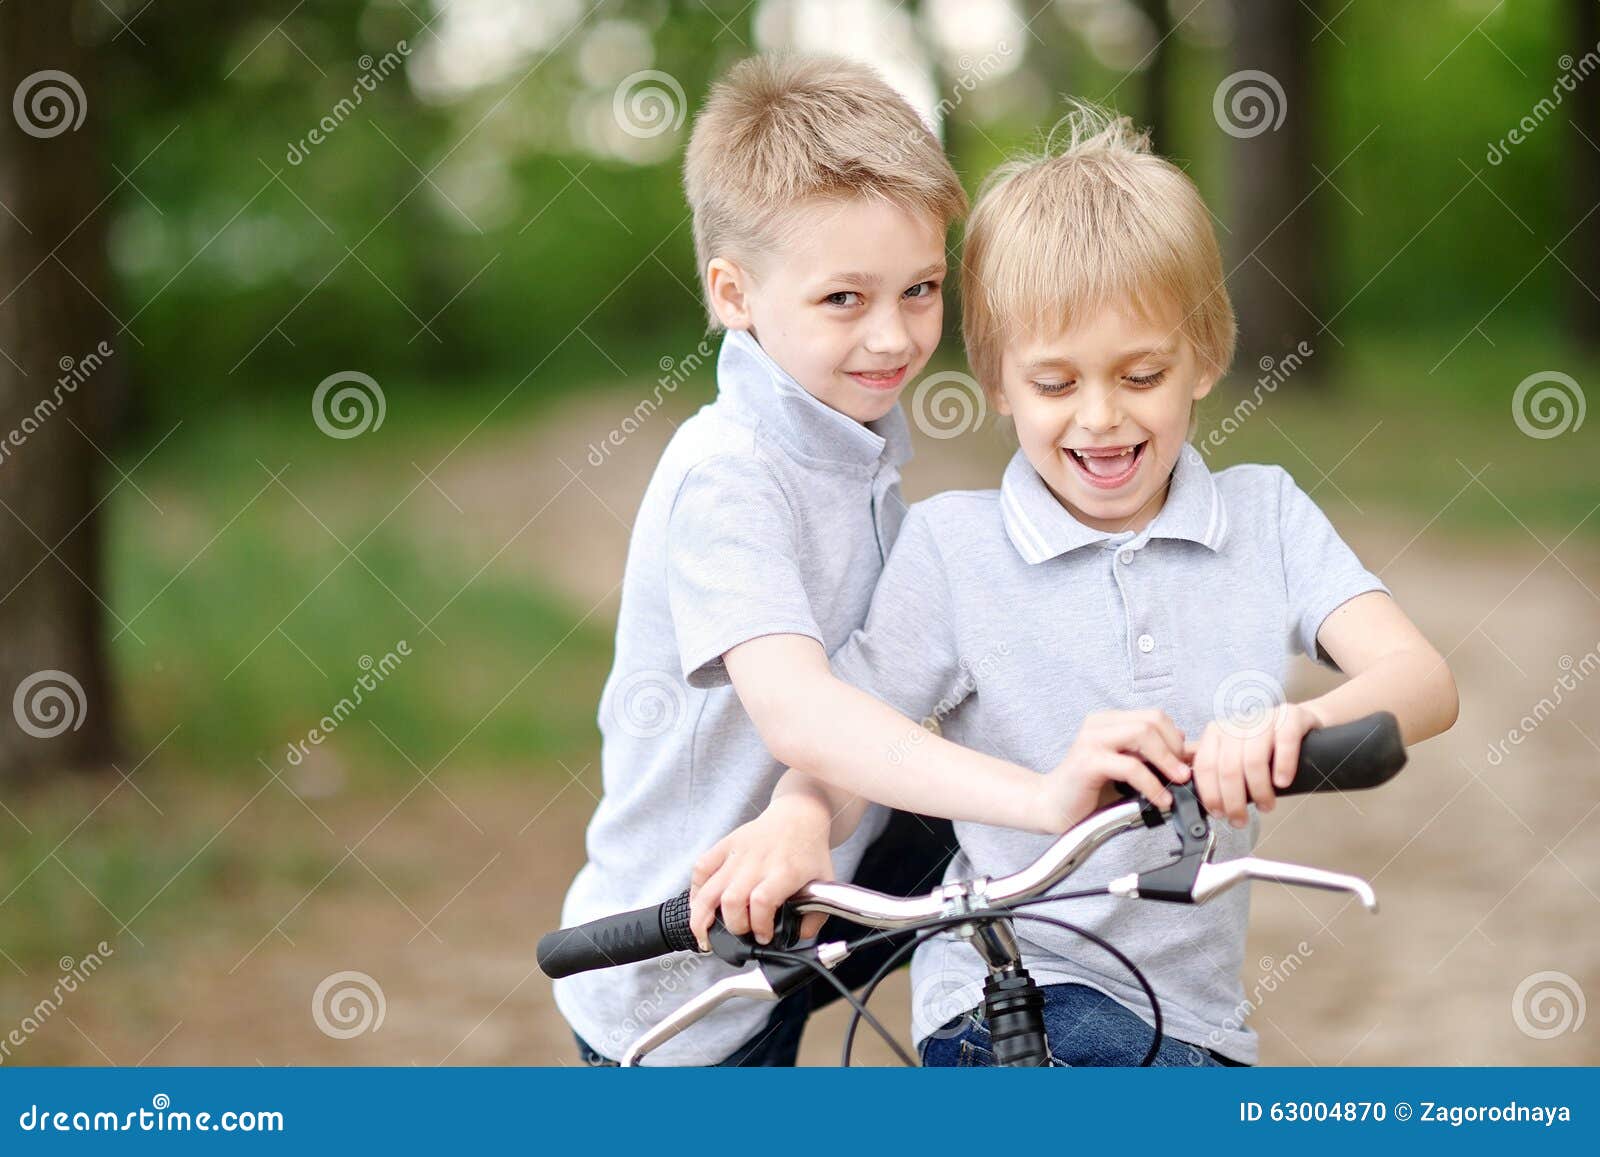 Portrait Of Two Boys In The Summer Stock Photo Image Of Adorable